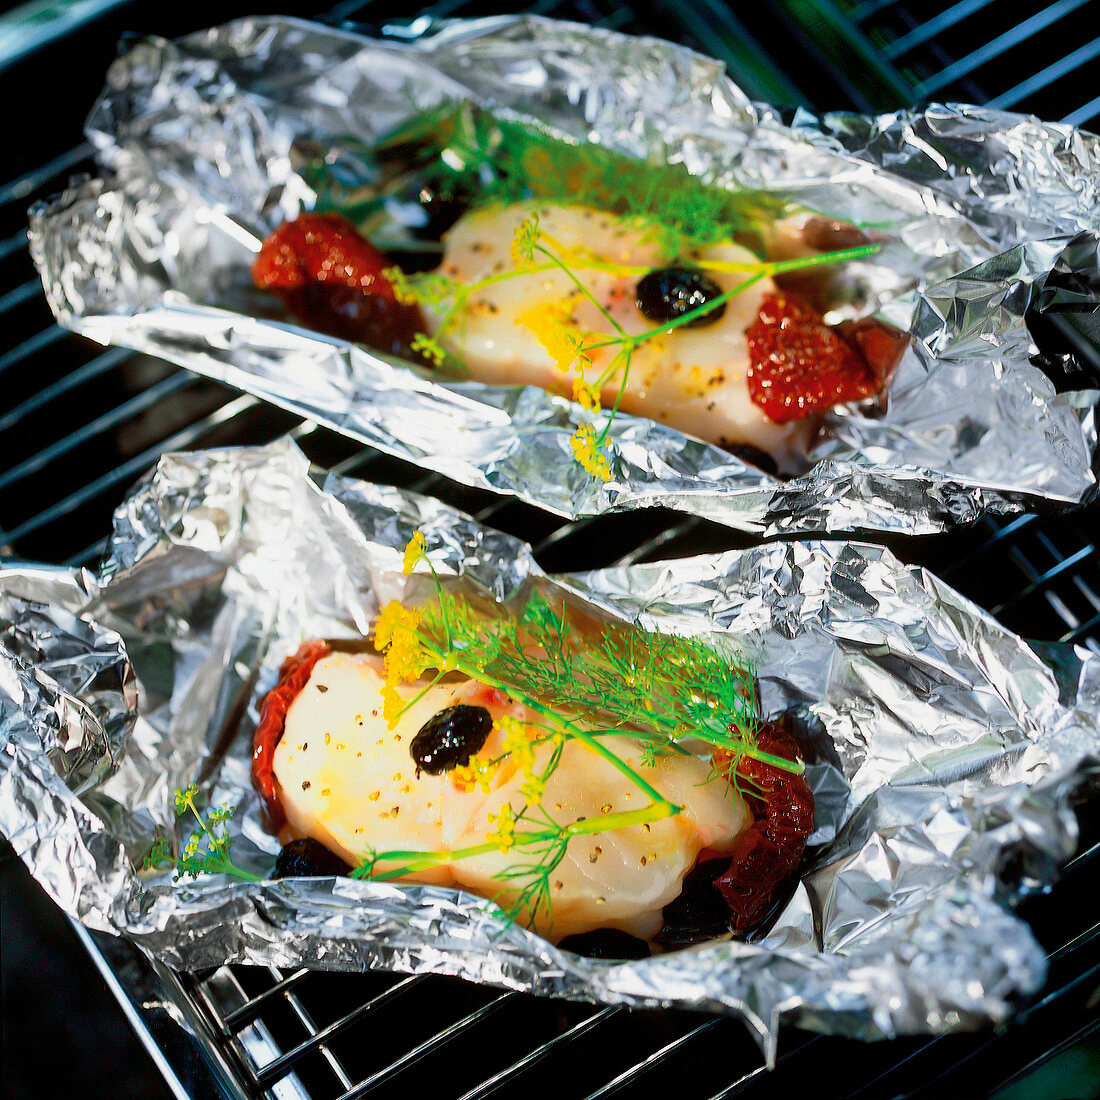 Monkfish with dried tomatoes and olive being grilled in silver foil